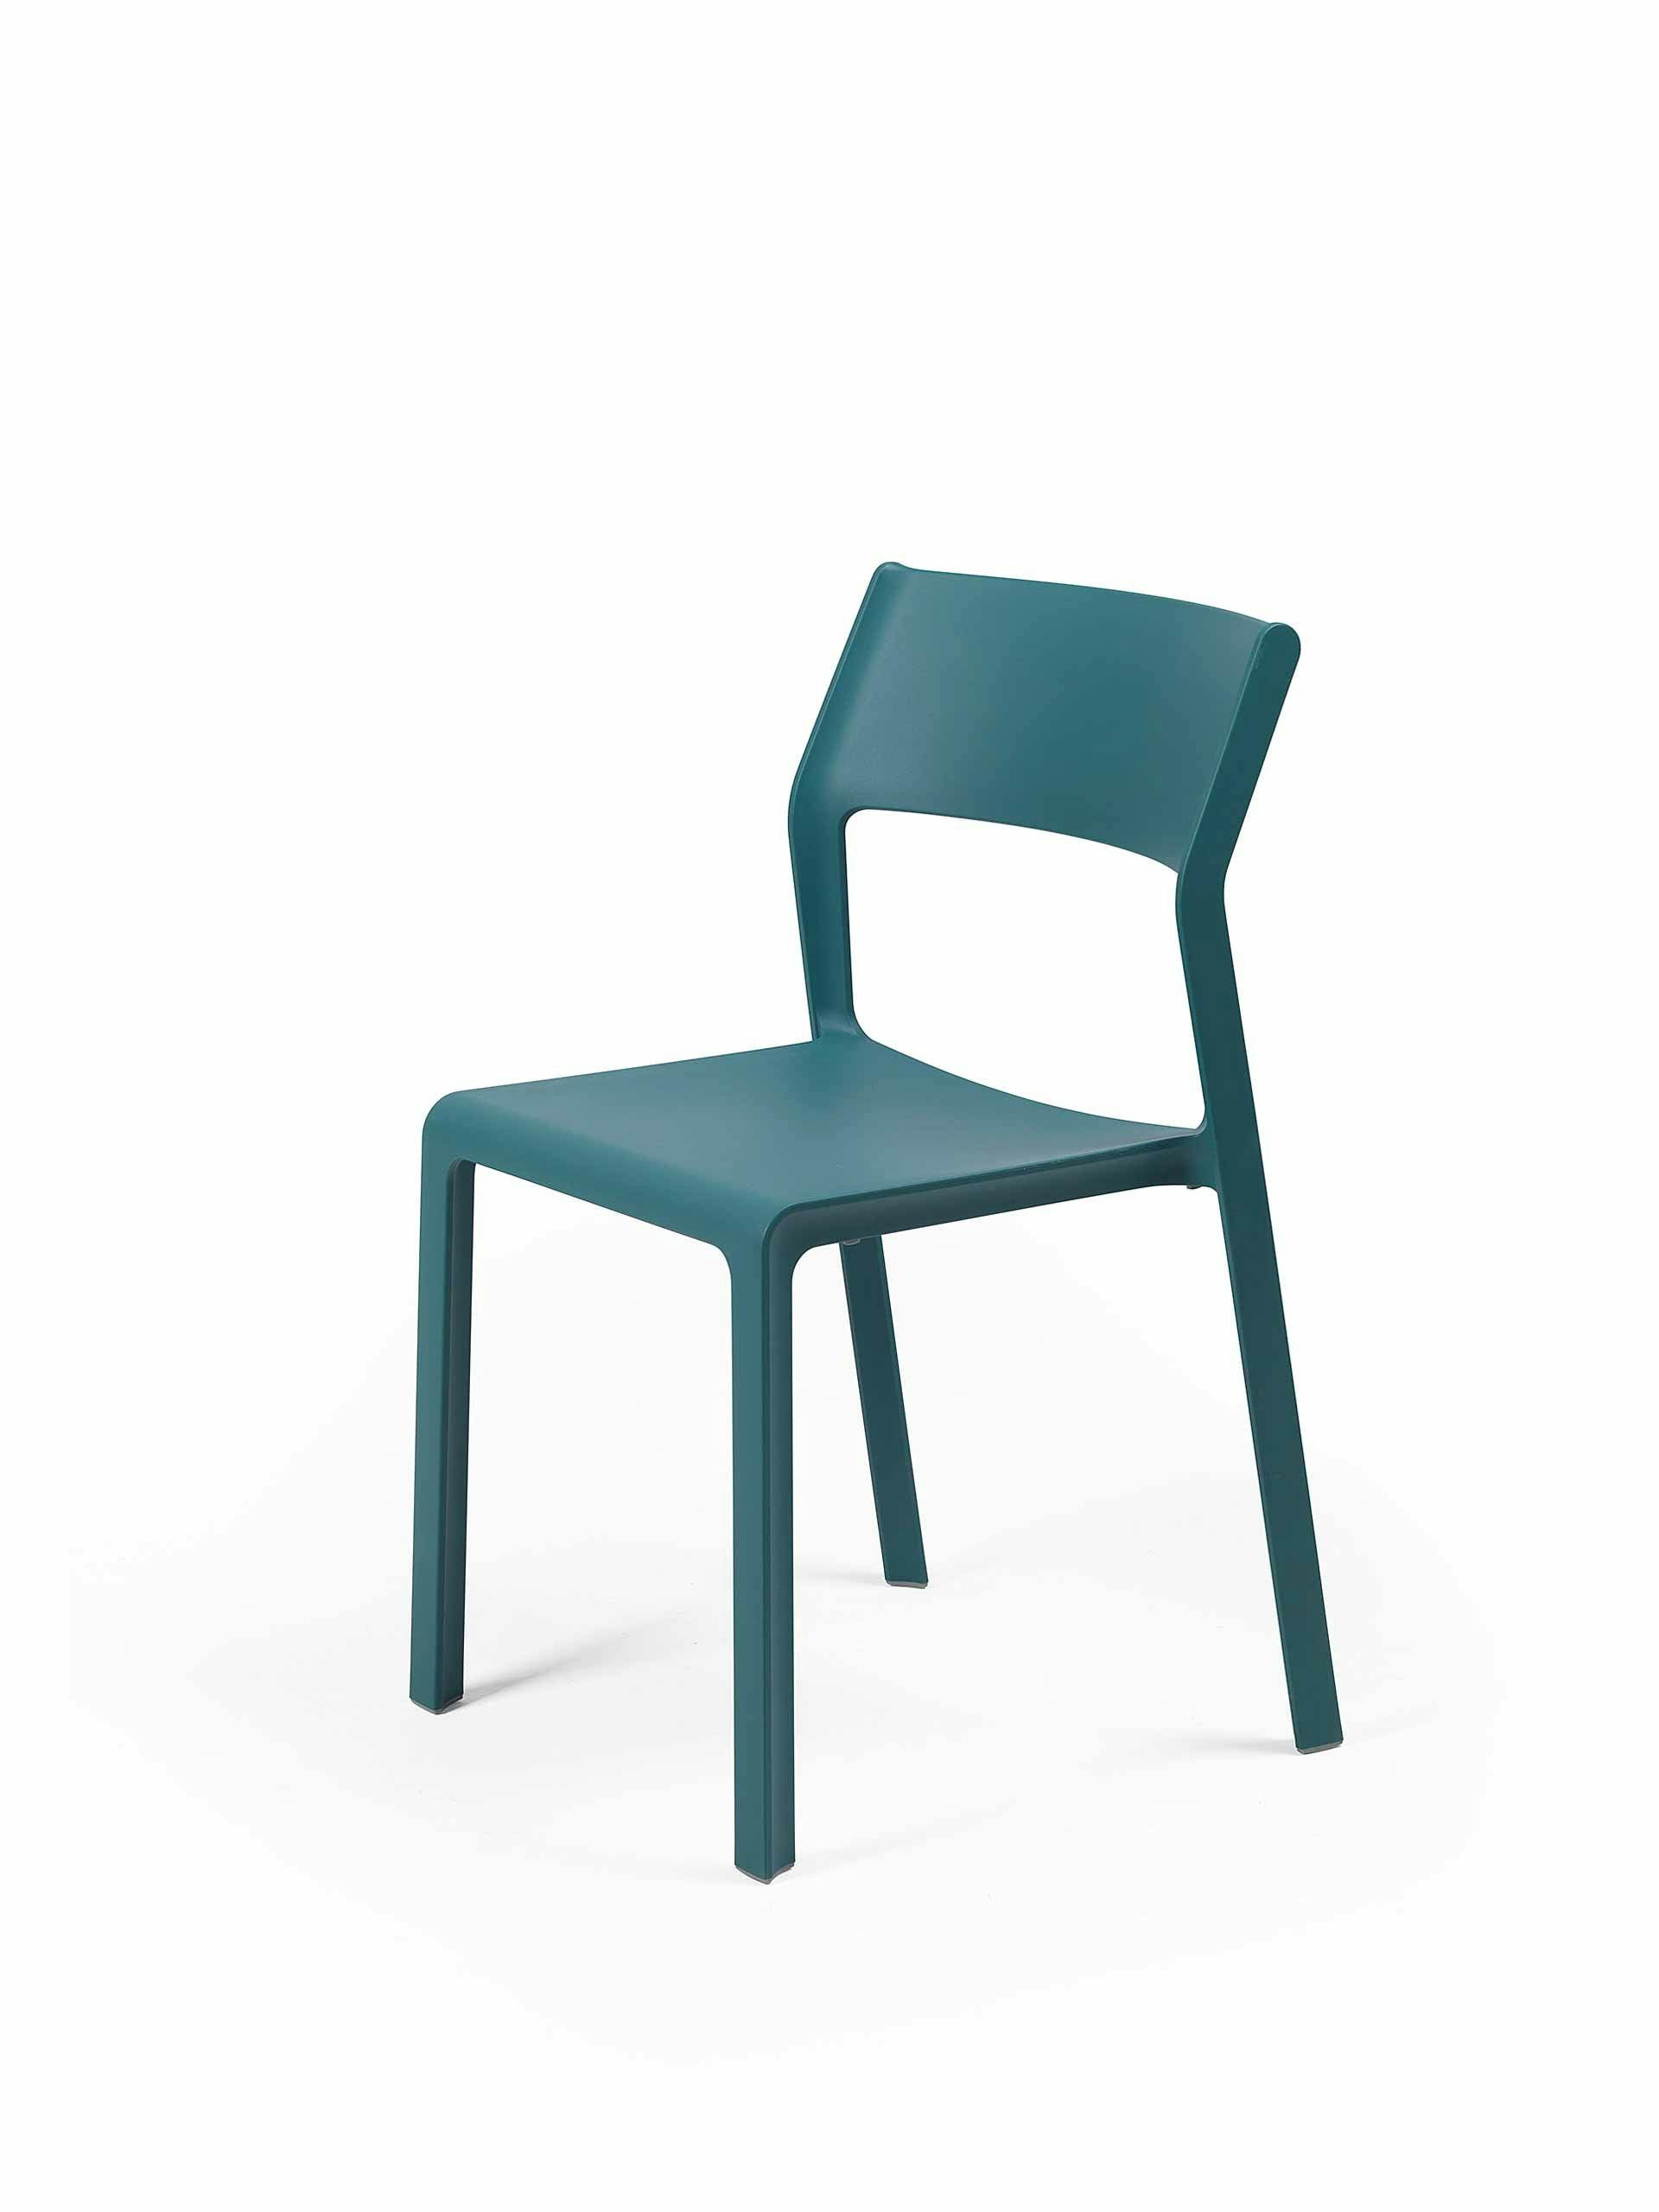 Bistro chairs (set of 2)